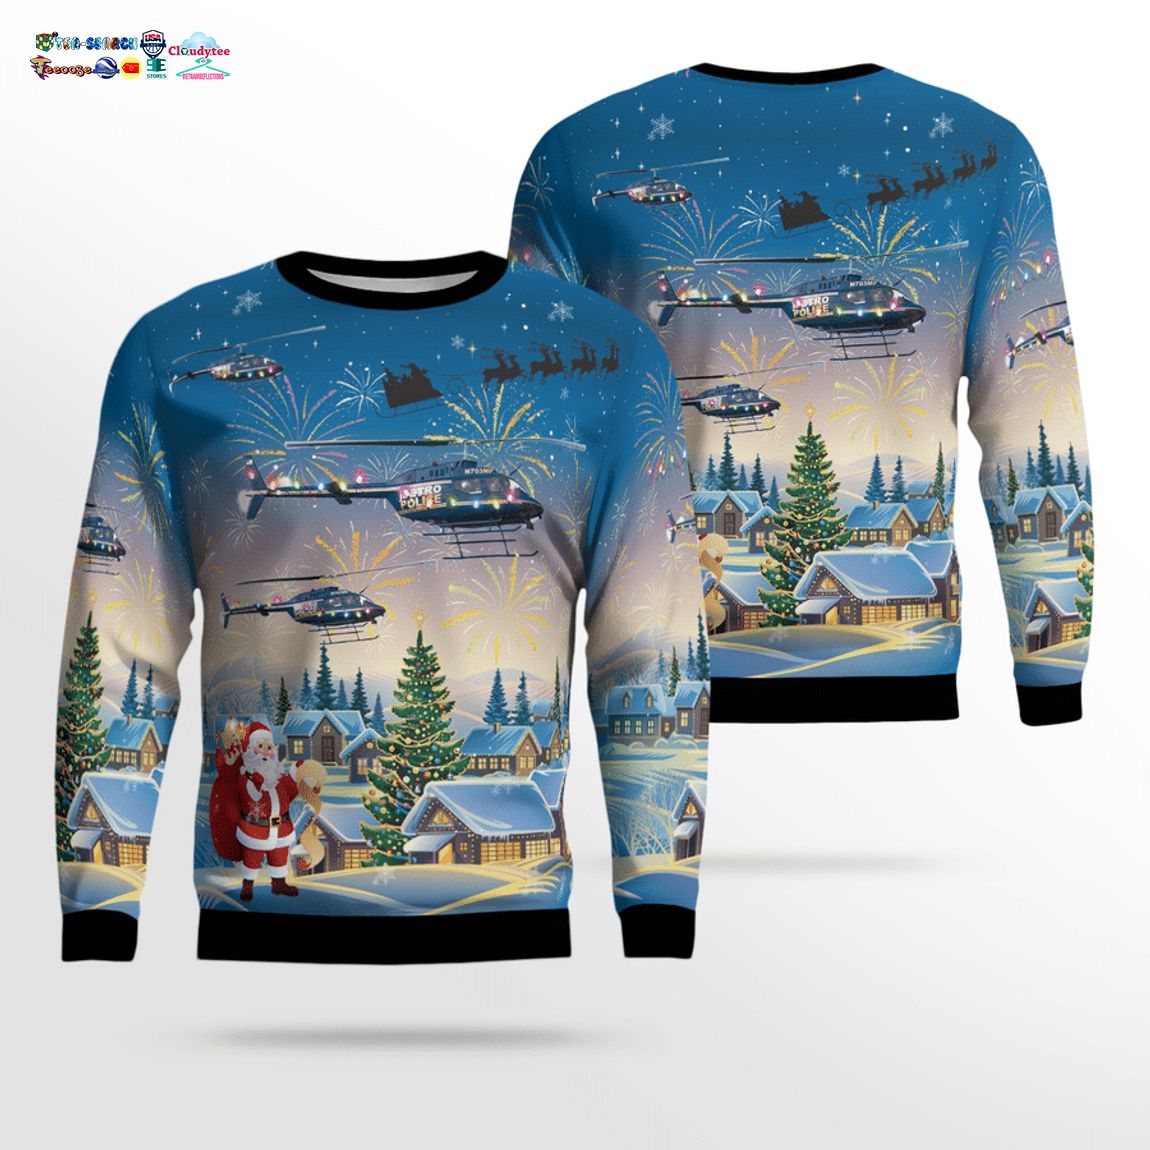 Tennessee Metropolitan Nashville Police Department OH-58 Kiowa Helicopter 3D Christmas Sweater